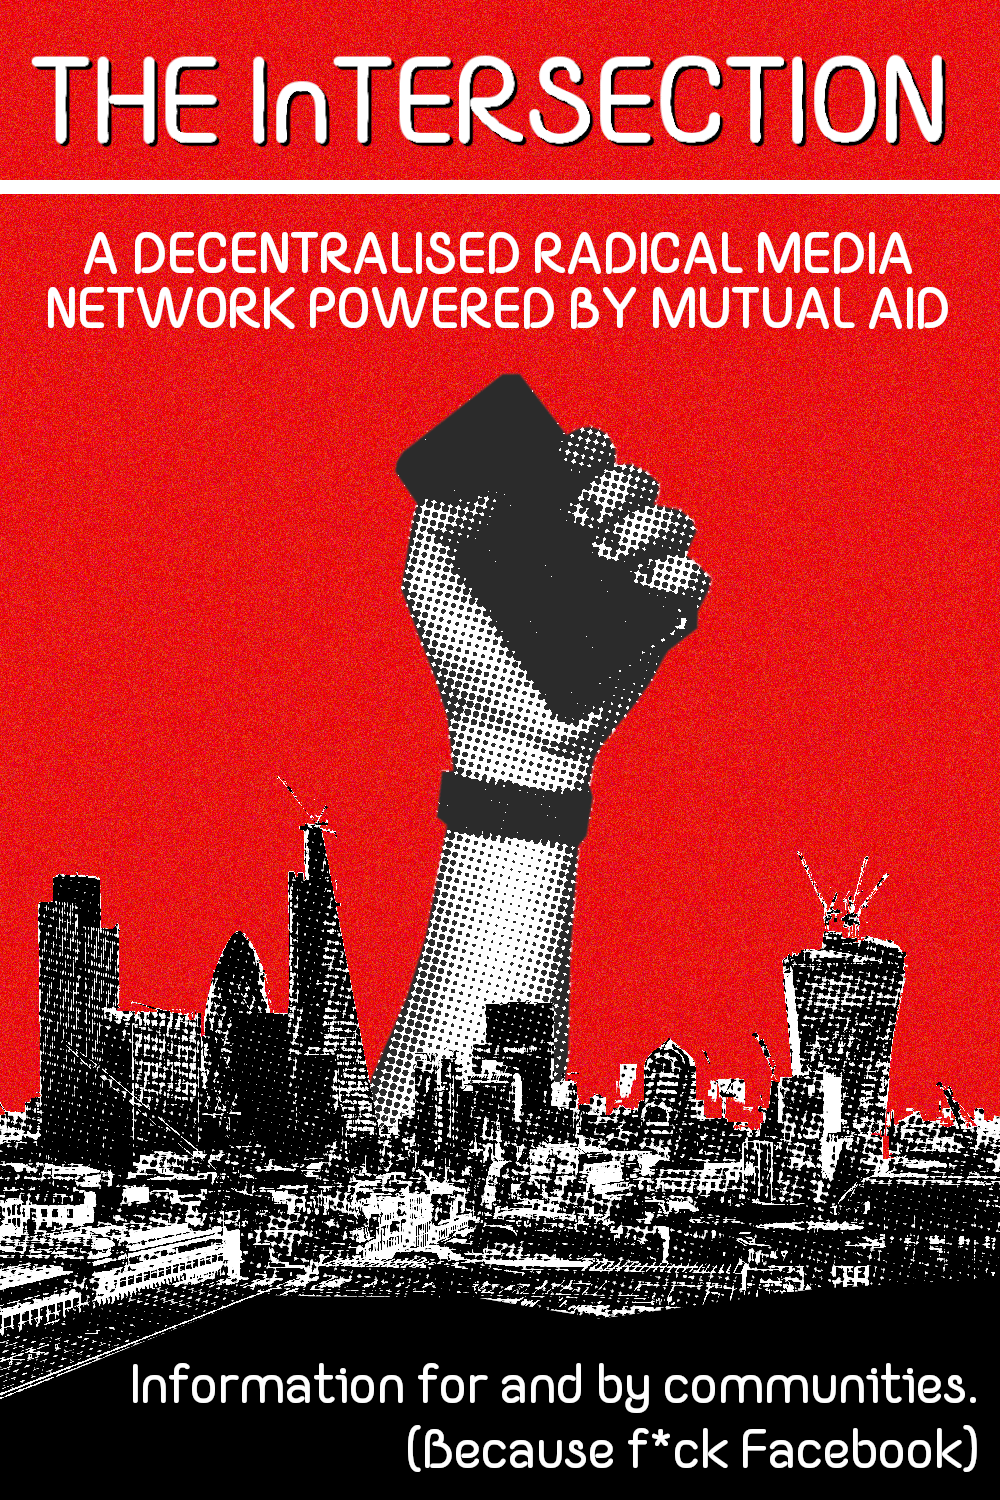 A poster with a hand rising from a cityscape gripping a smartphone, with the text "The Intersection: a decentralised radical media network powered by mutual aid. Information for and by communities. (Because f*ck Facebook)